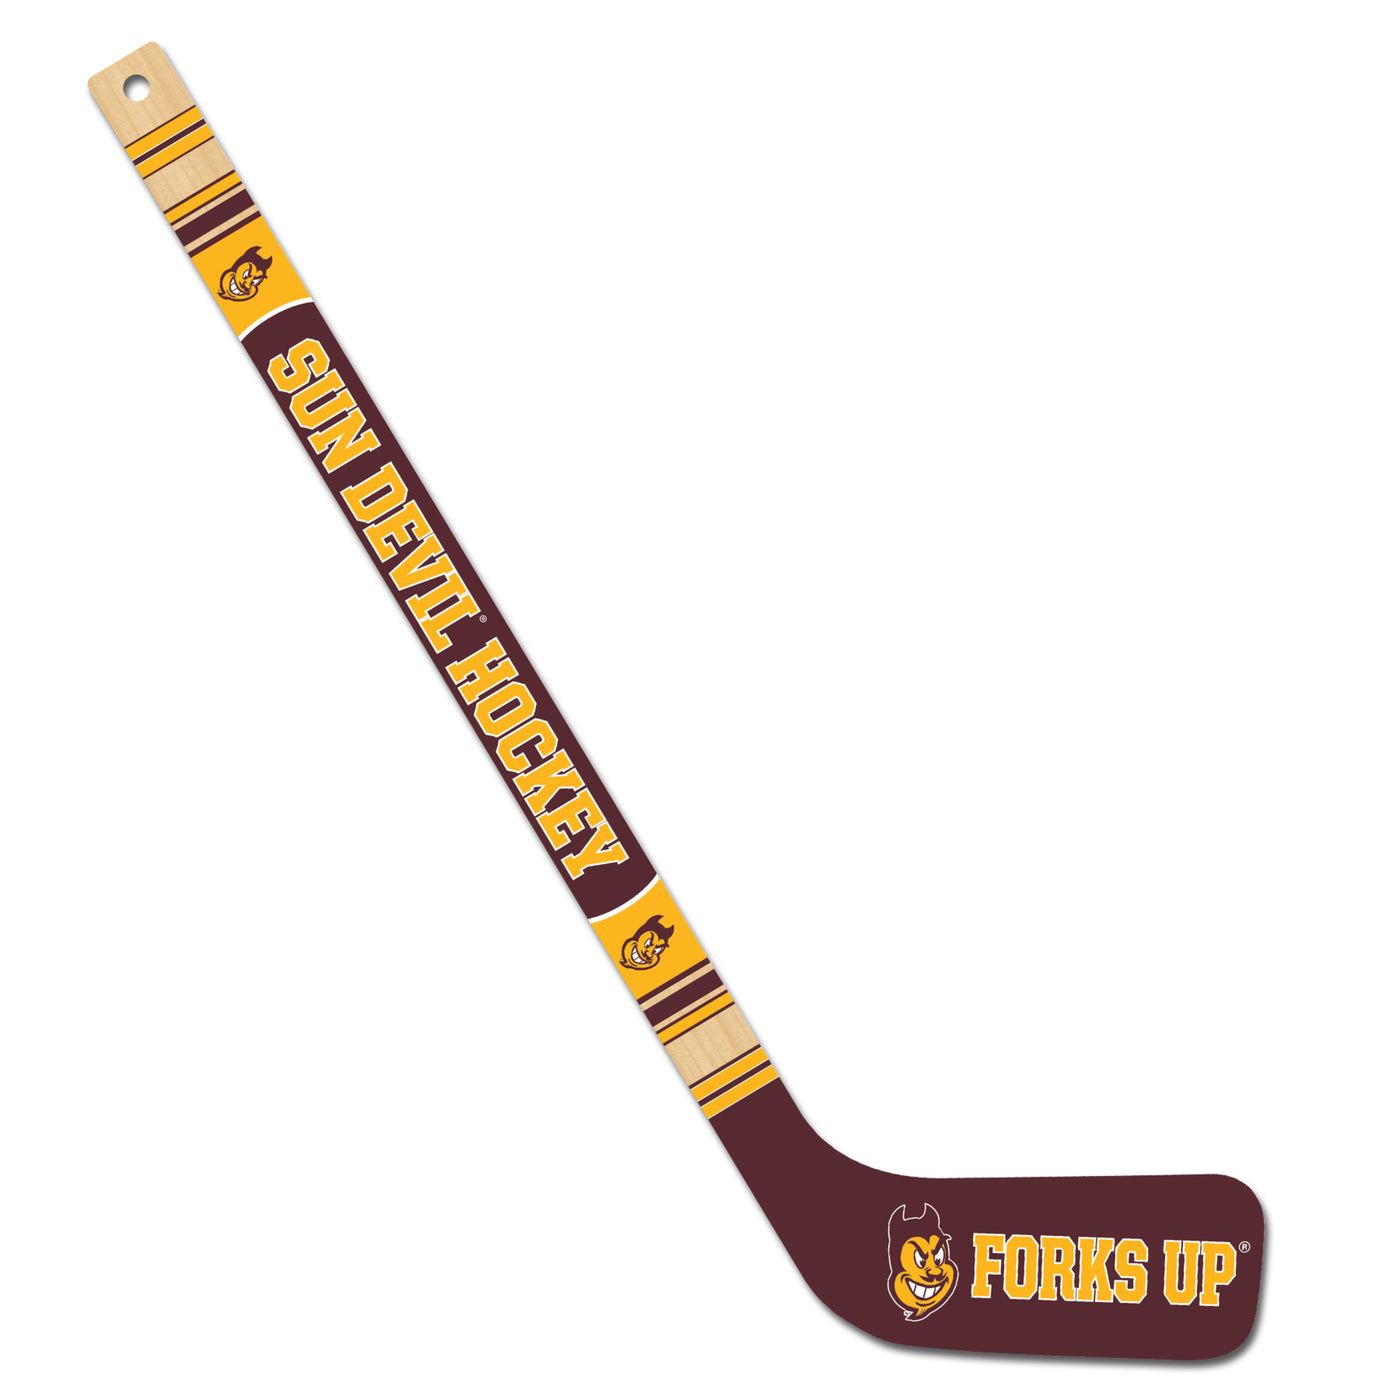 ASU Small wooden miniature hockey stick . various patterns of gold and maroon stripes all down the stick. At the bottom it is maroon with the text 